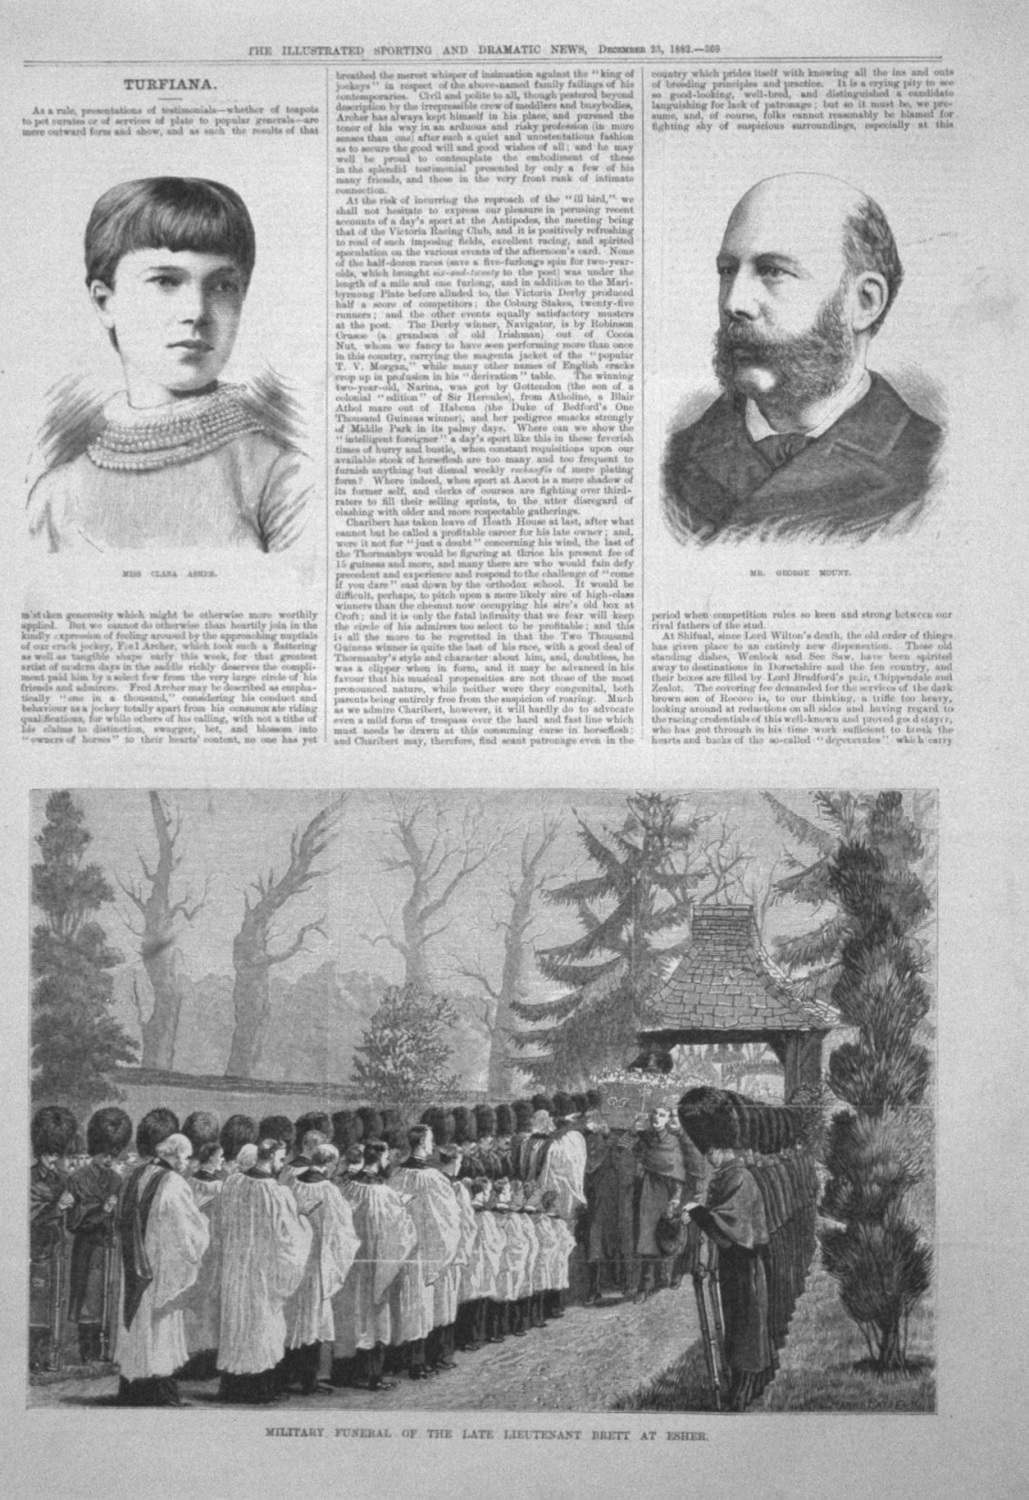 Military Funeral of the Late Lieutenant Brett at Esher. 1882